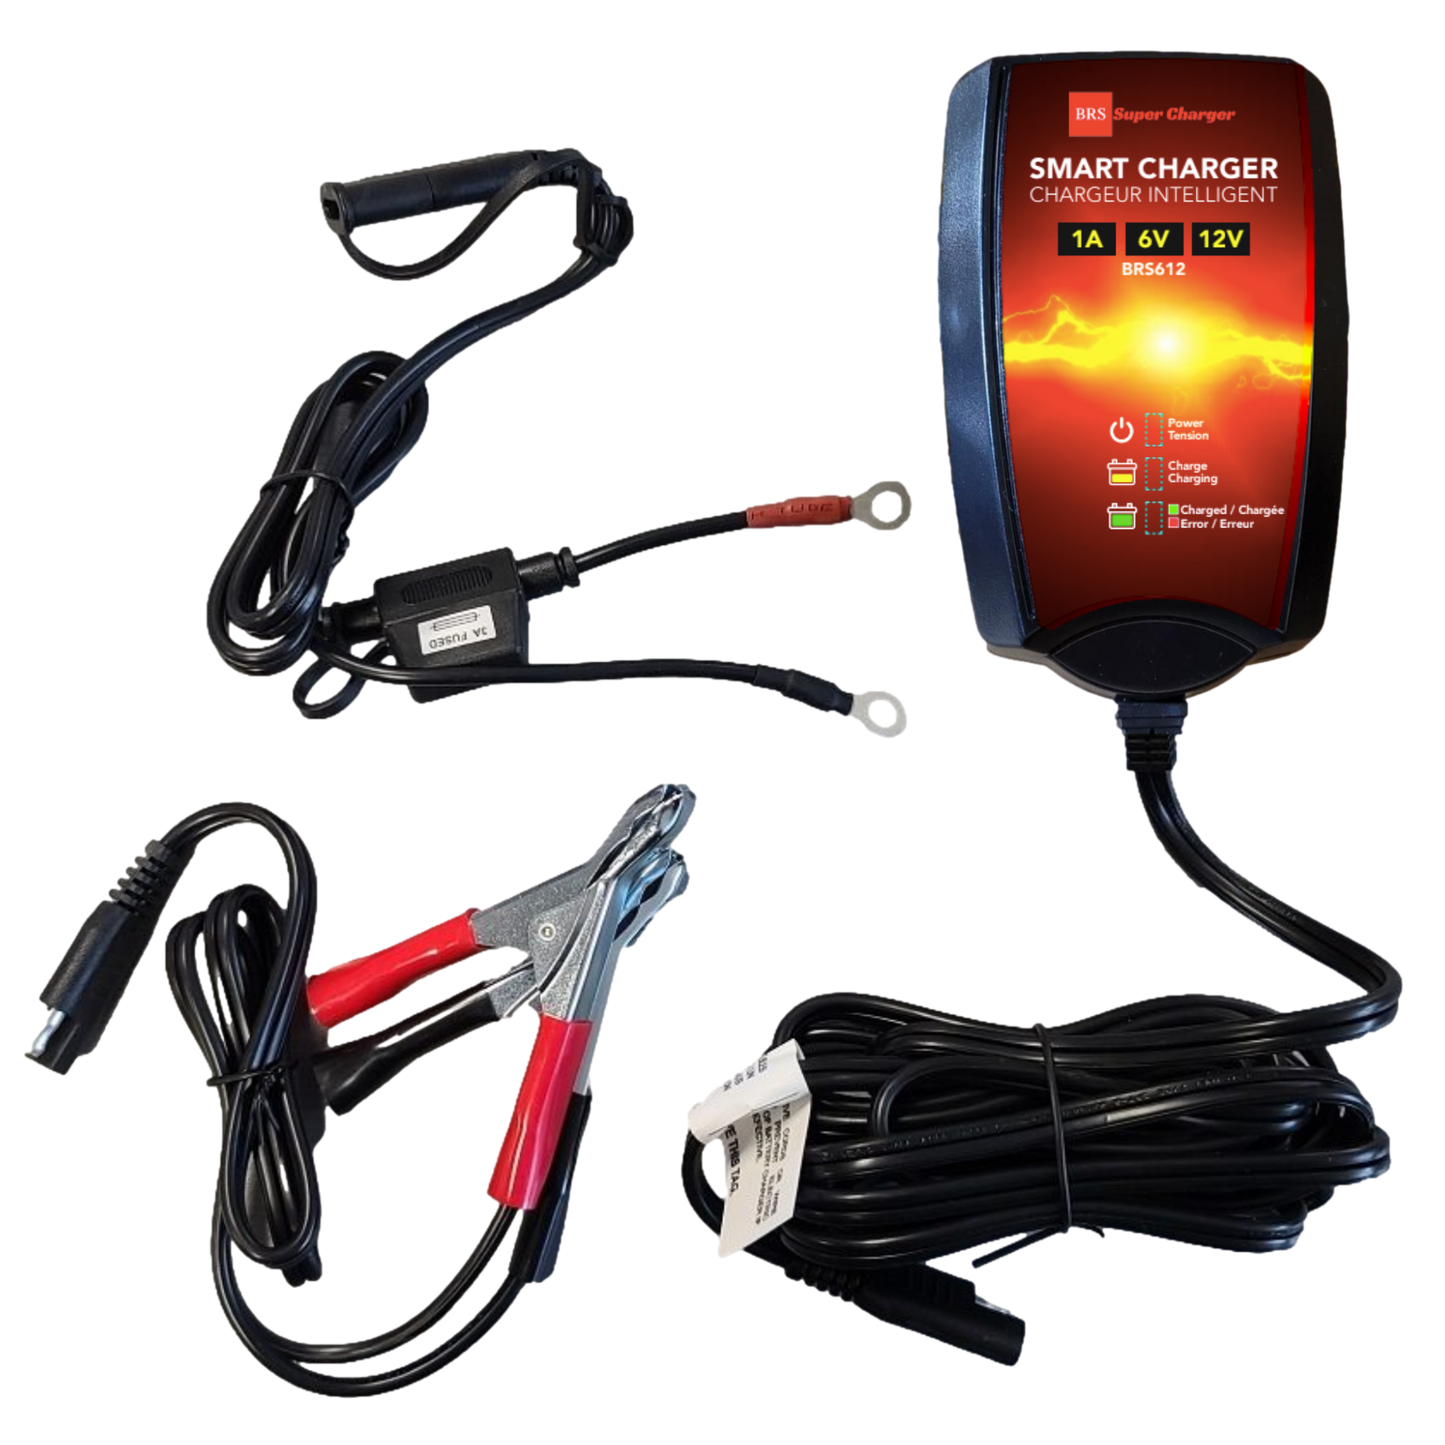 High Performance BRS30L-BS 2 Year Battery & Smart Charger / Maintainer Combo Bundle Kit  12v Sealed AGM PowerSports Battery - BRS Super Battery